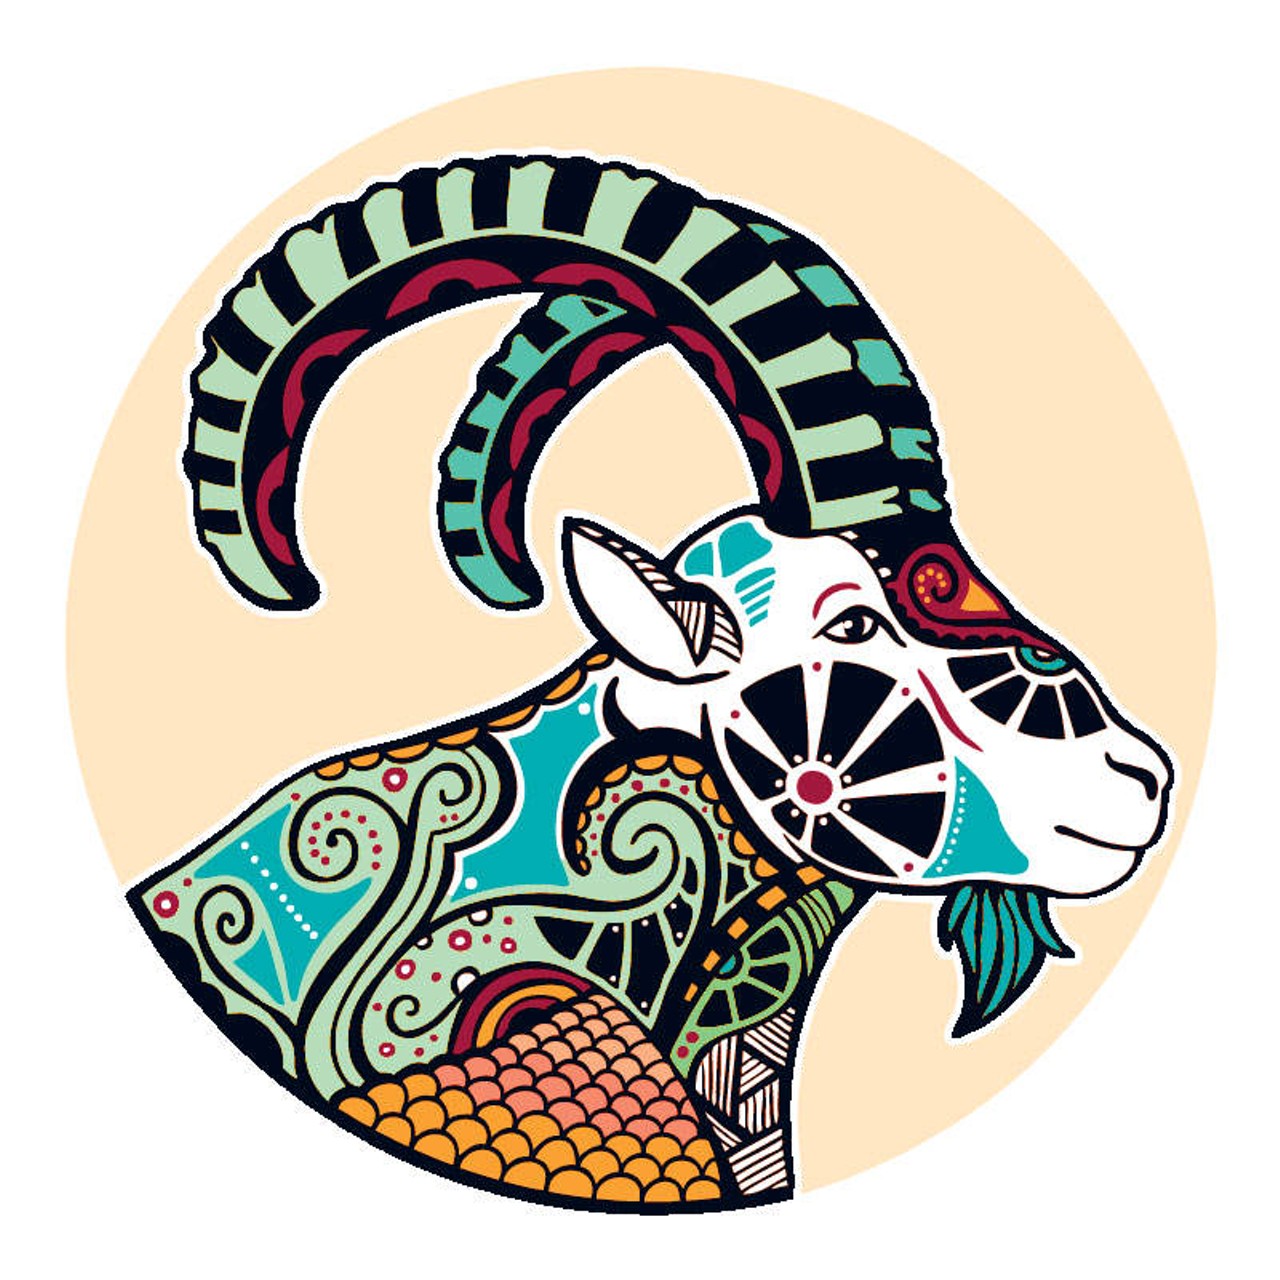 CAPRICORN: December 21 - January 20
You've been working too hard to notice that your emotional needs have fallen through the cracks. Months of this have made it clear that it's time to get a life. At the point where duty, responsibility, and all of that stuff goes over the top, there is an opening that allows us to see what we really need. You're just about there. None of what's become too important is as big as you've made it. Loosening your attachments and getting far enough away from the fray to make room for a little life to trickle in will make it easier to put all of this pressure into perspective.